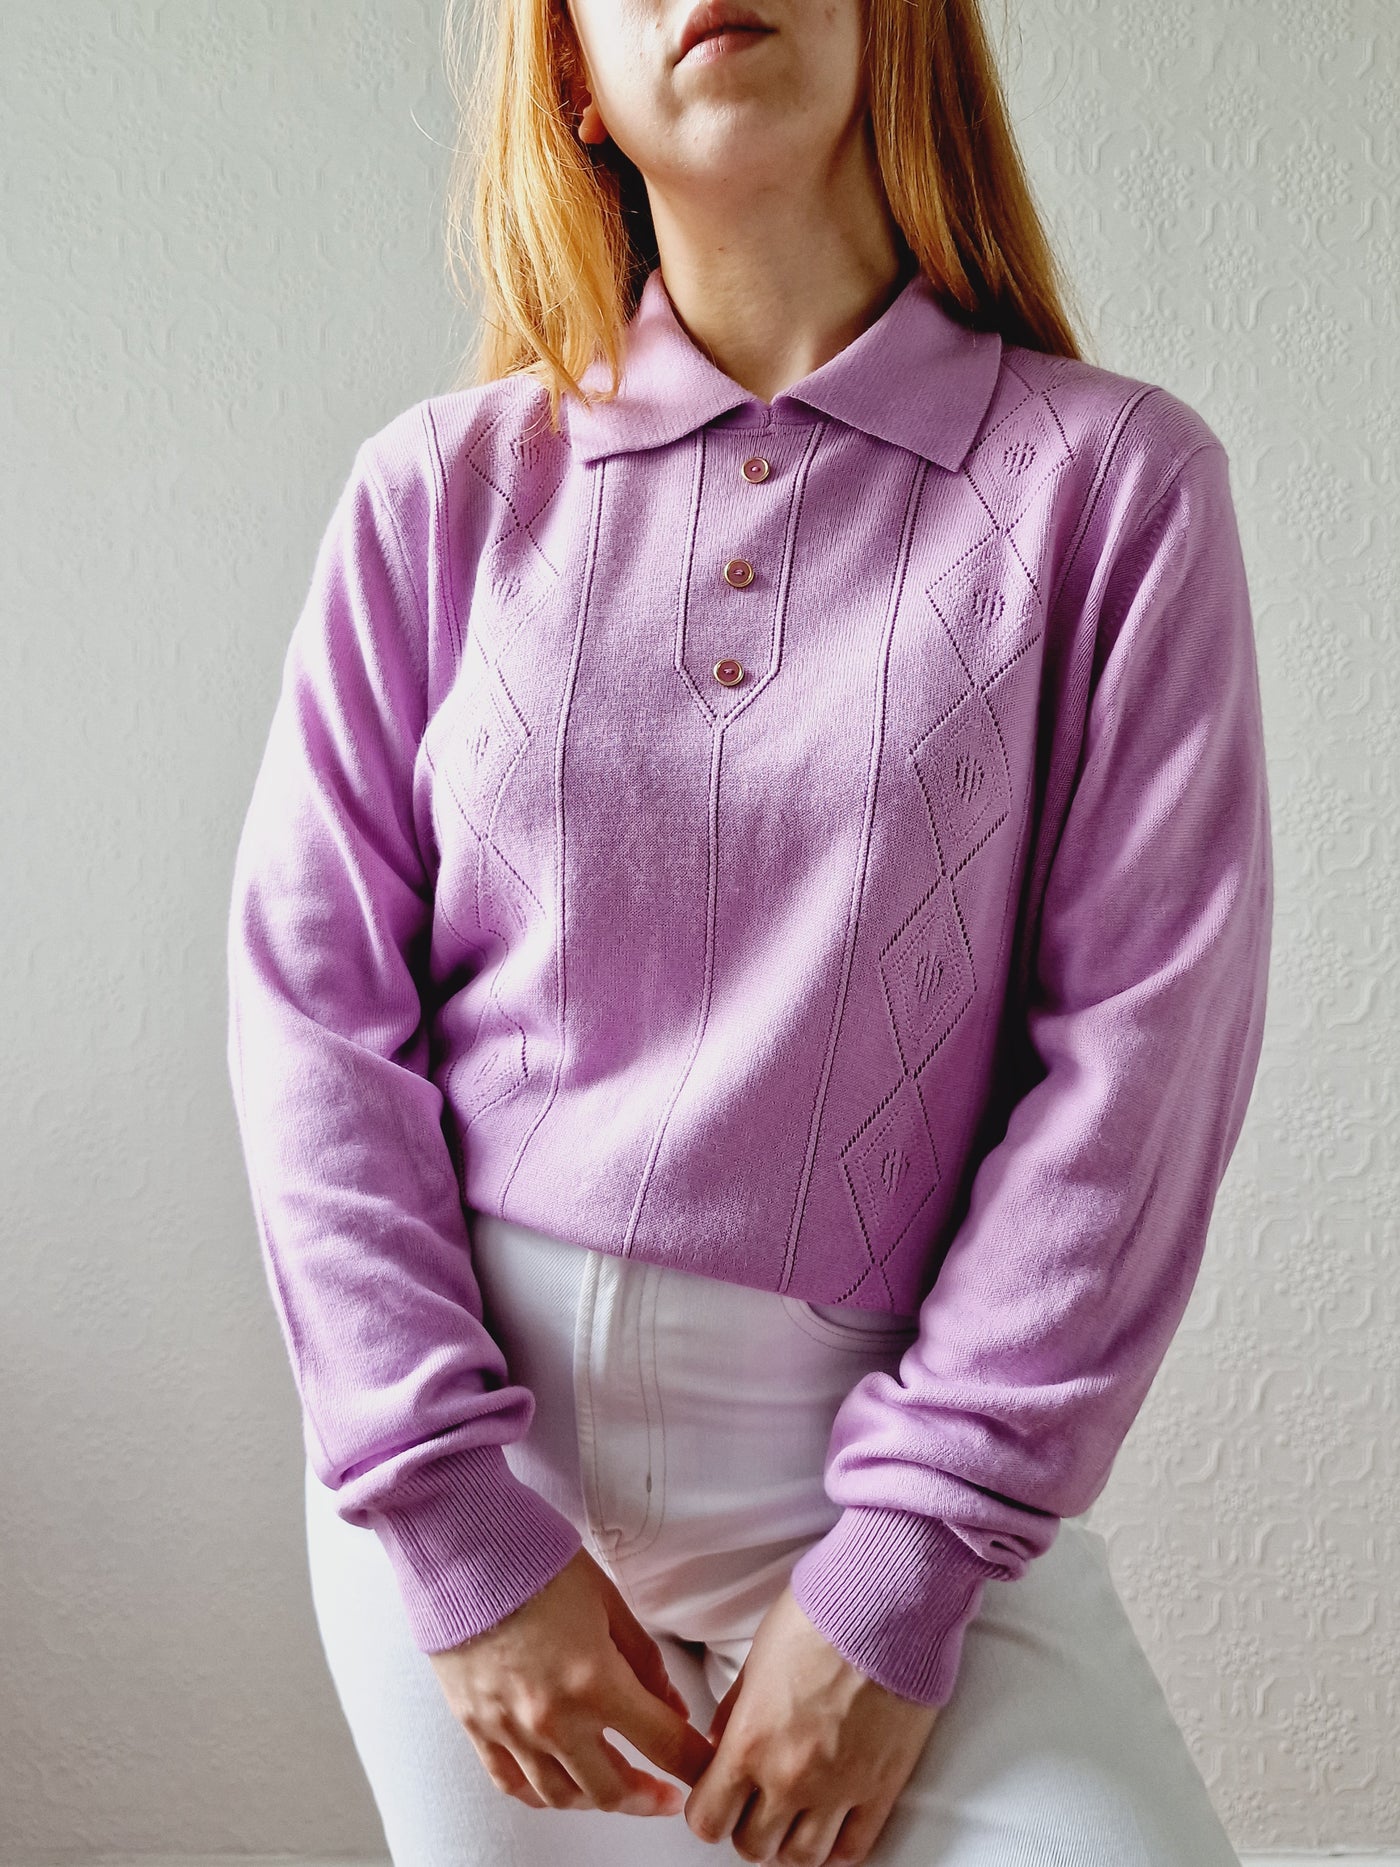 Vintage Mauve Polo Style Long Sleeve Knit Top with Collared Neck - M/L